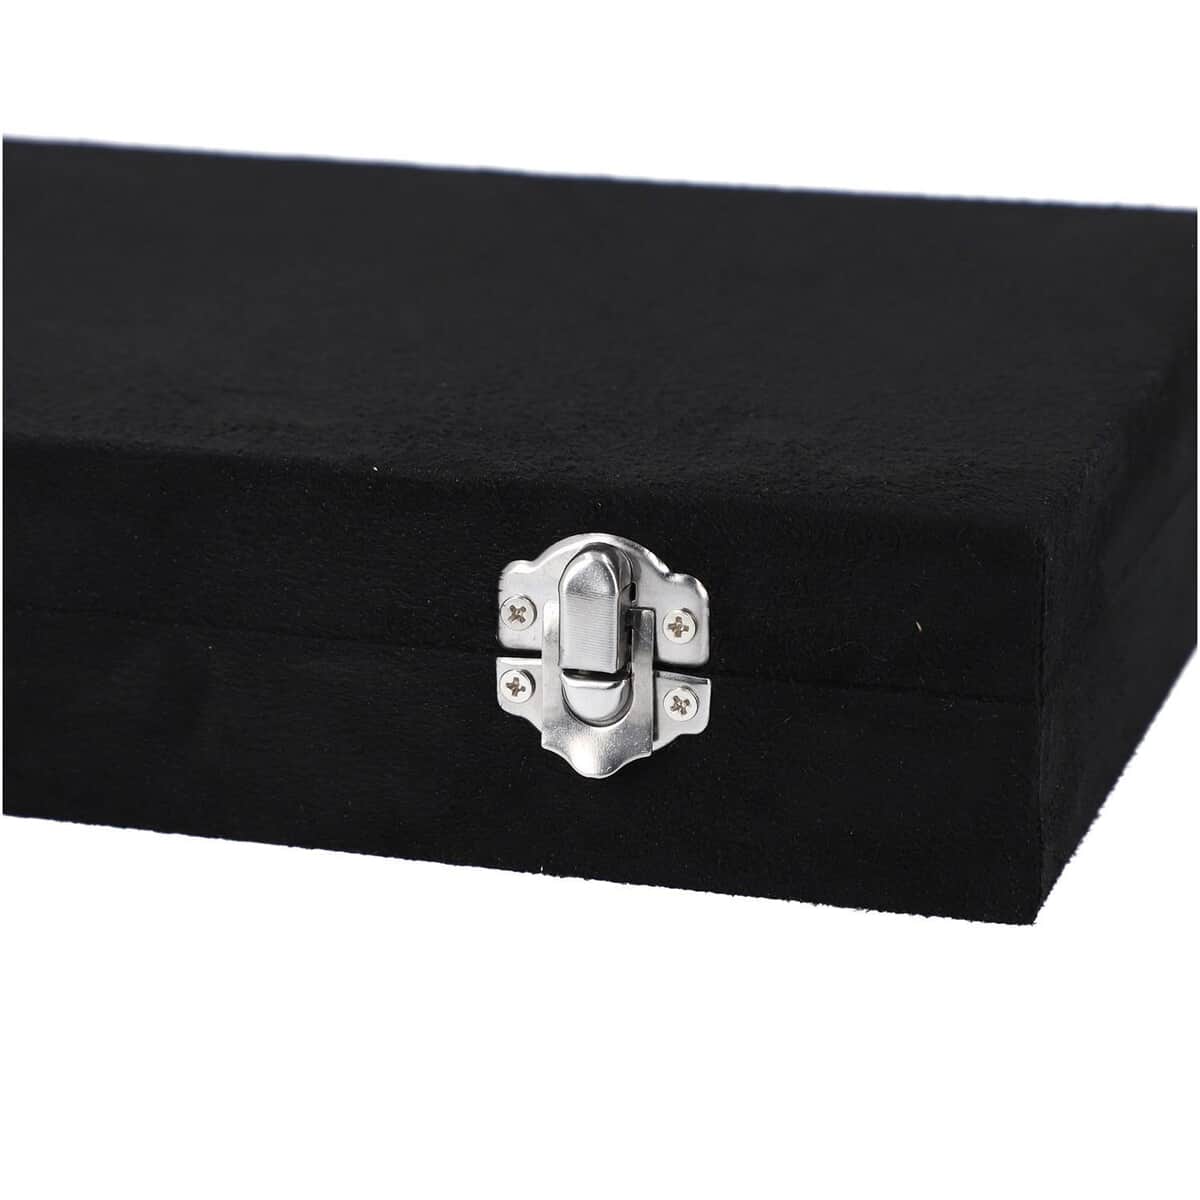 Black Velvet Jewelry Box with Anti Tarnish Lining & Lock, Anti Tarnish Jewelry Case, Jewelry Organizer, Jewelry Storage Box (8 Necklace Hooks, 8 Earrings/Pendant Sections and 10 Rings Slots) image number 6